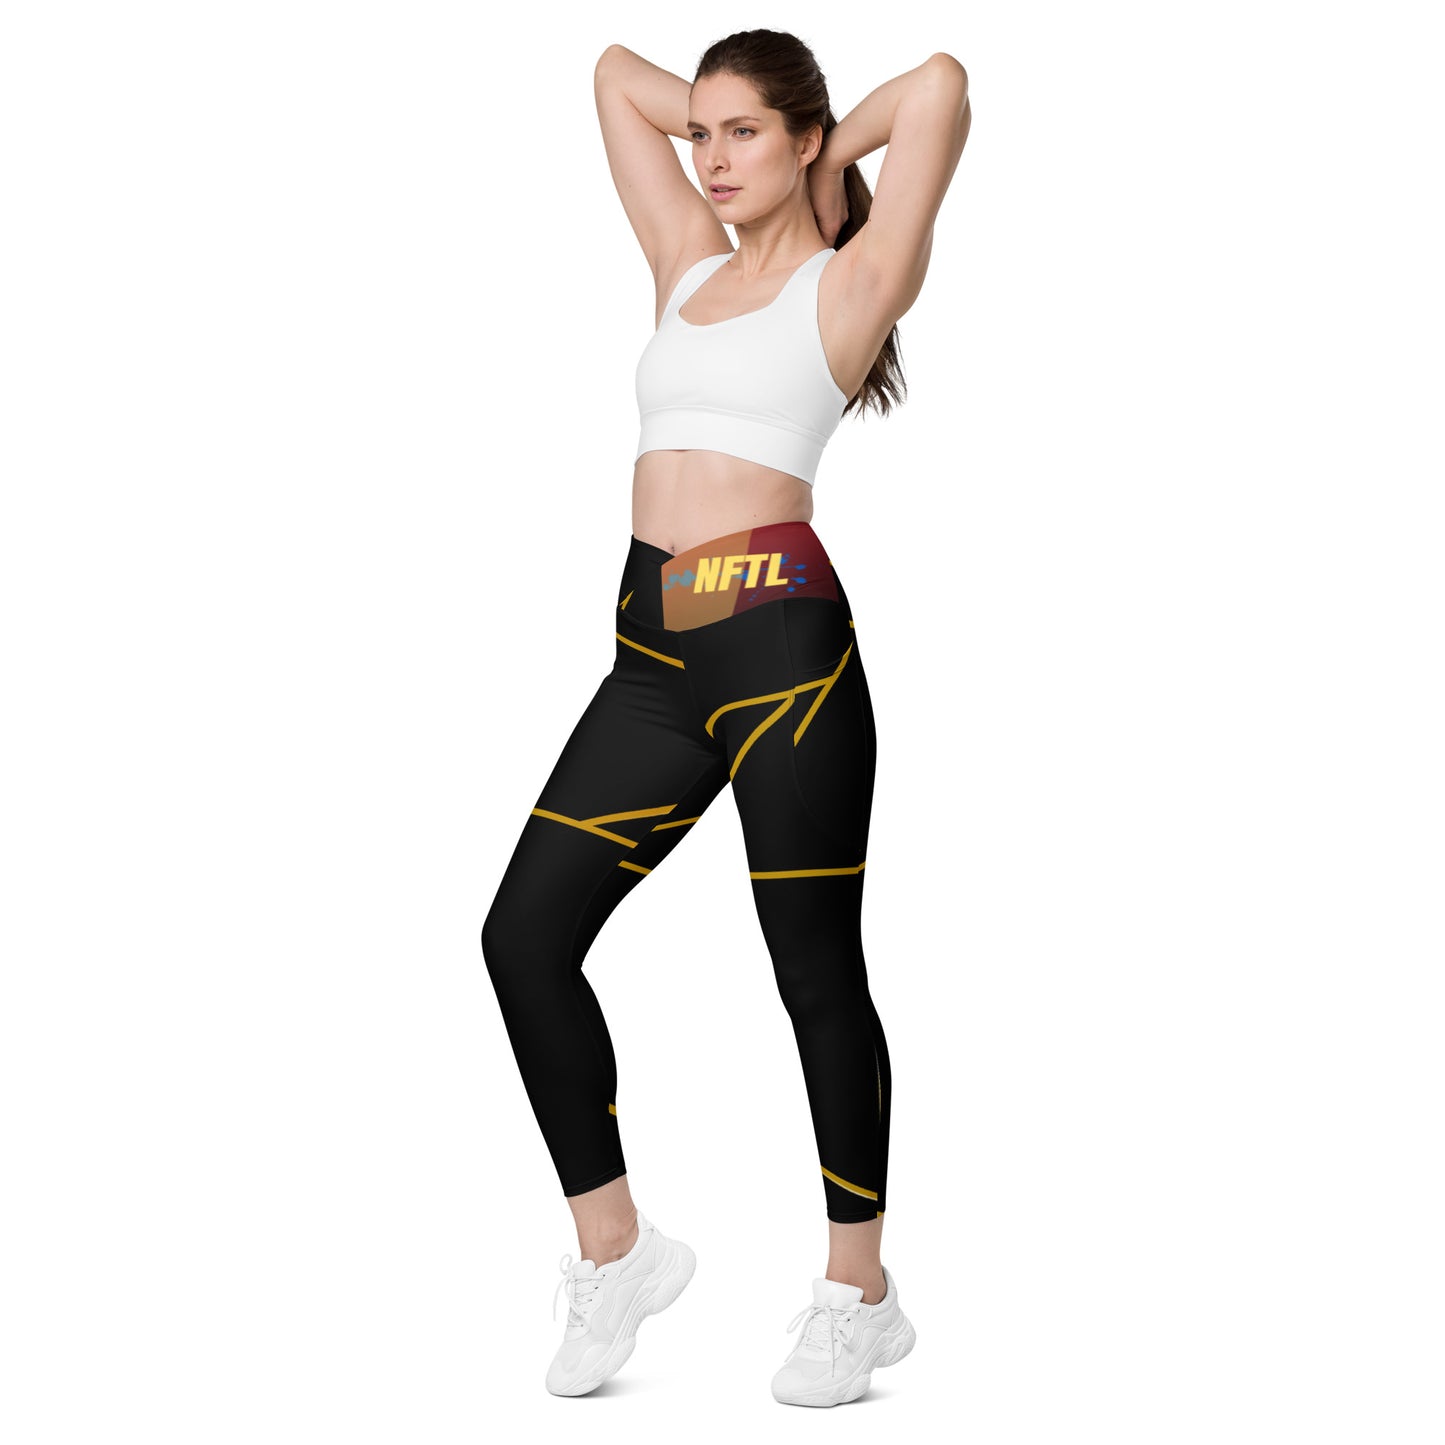 $NFTL Crossover leggings with pockets